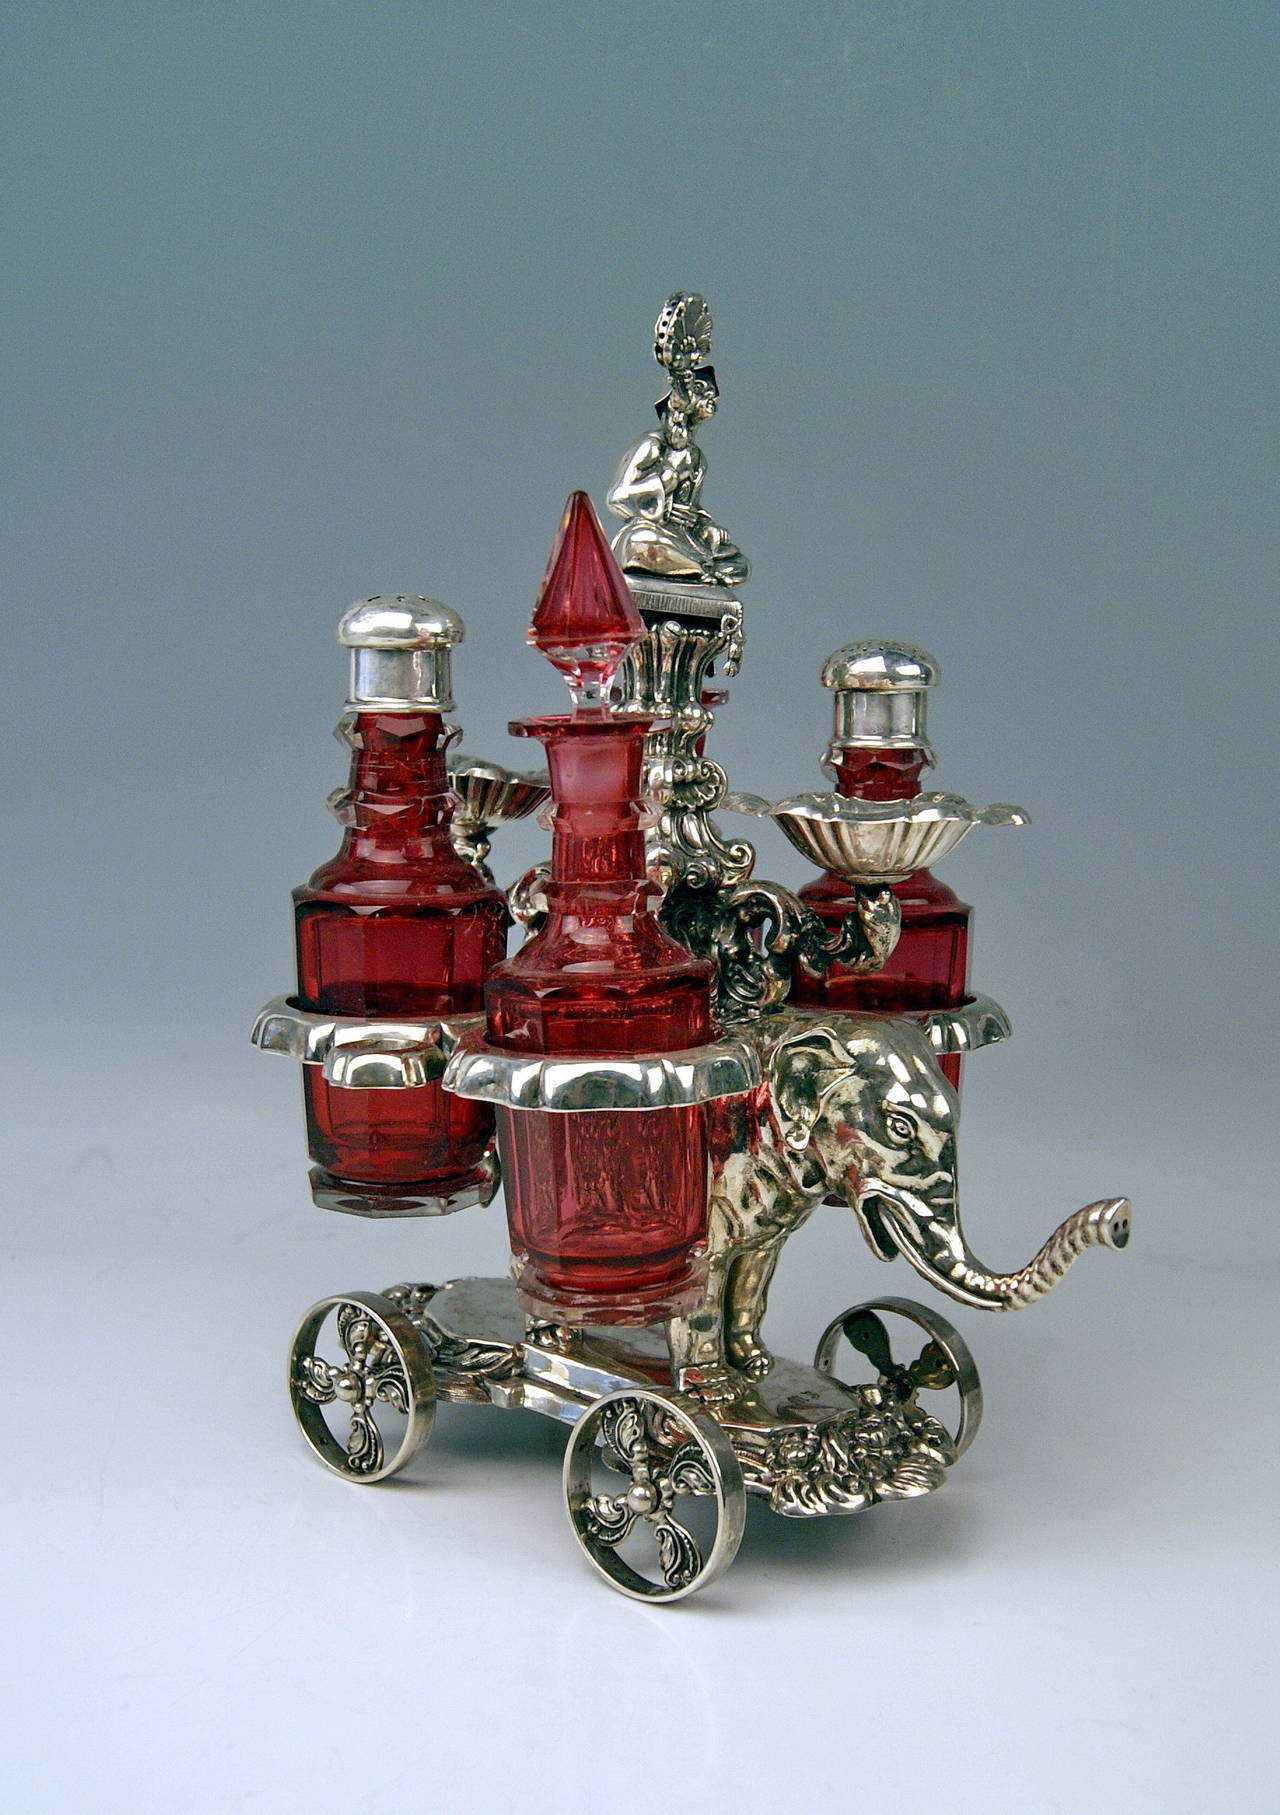 Gorgeous Rarest Condiment Set, consisting of Silver Holder / Support with Glass Bottles  /  made in Vienna.

PARTICULAR FEATURE:
The silver holder keeping the bottles is shaped as a sculptured elephant's figurine attached to wheels which are in